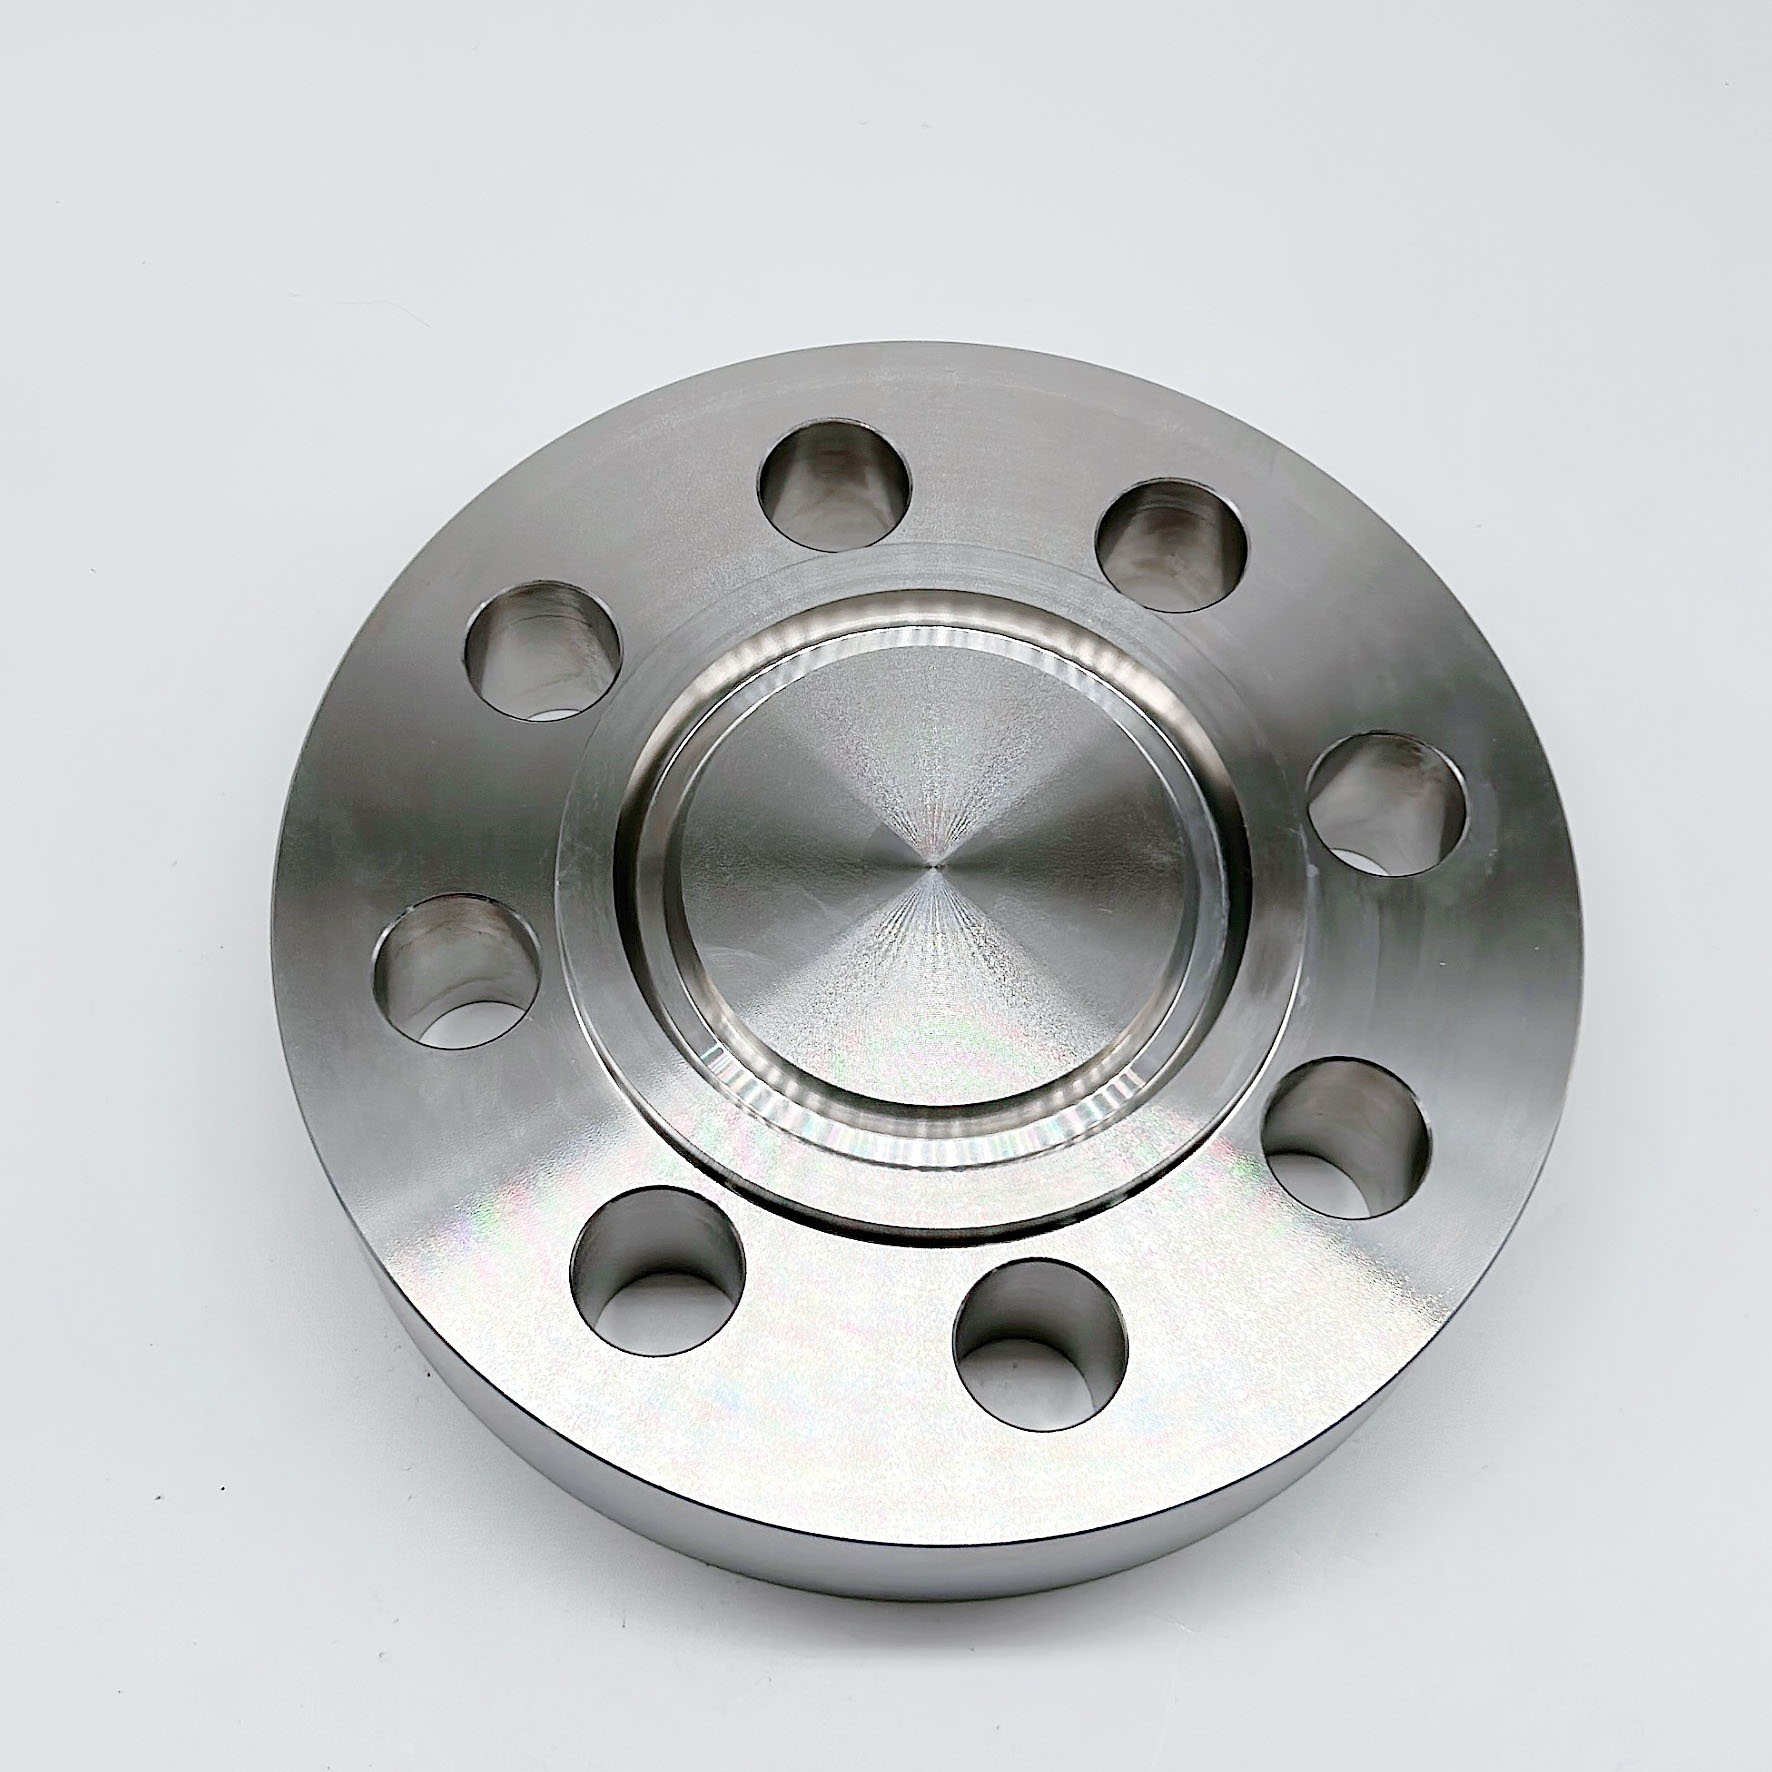 2A14 Aluminum Nylon Coated Plate Flange Sop-Ff JIS Non-standard Cover Plate And Blind Flange